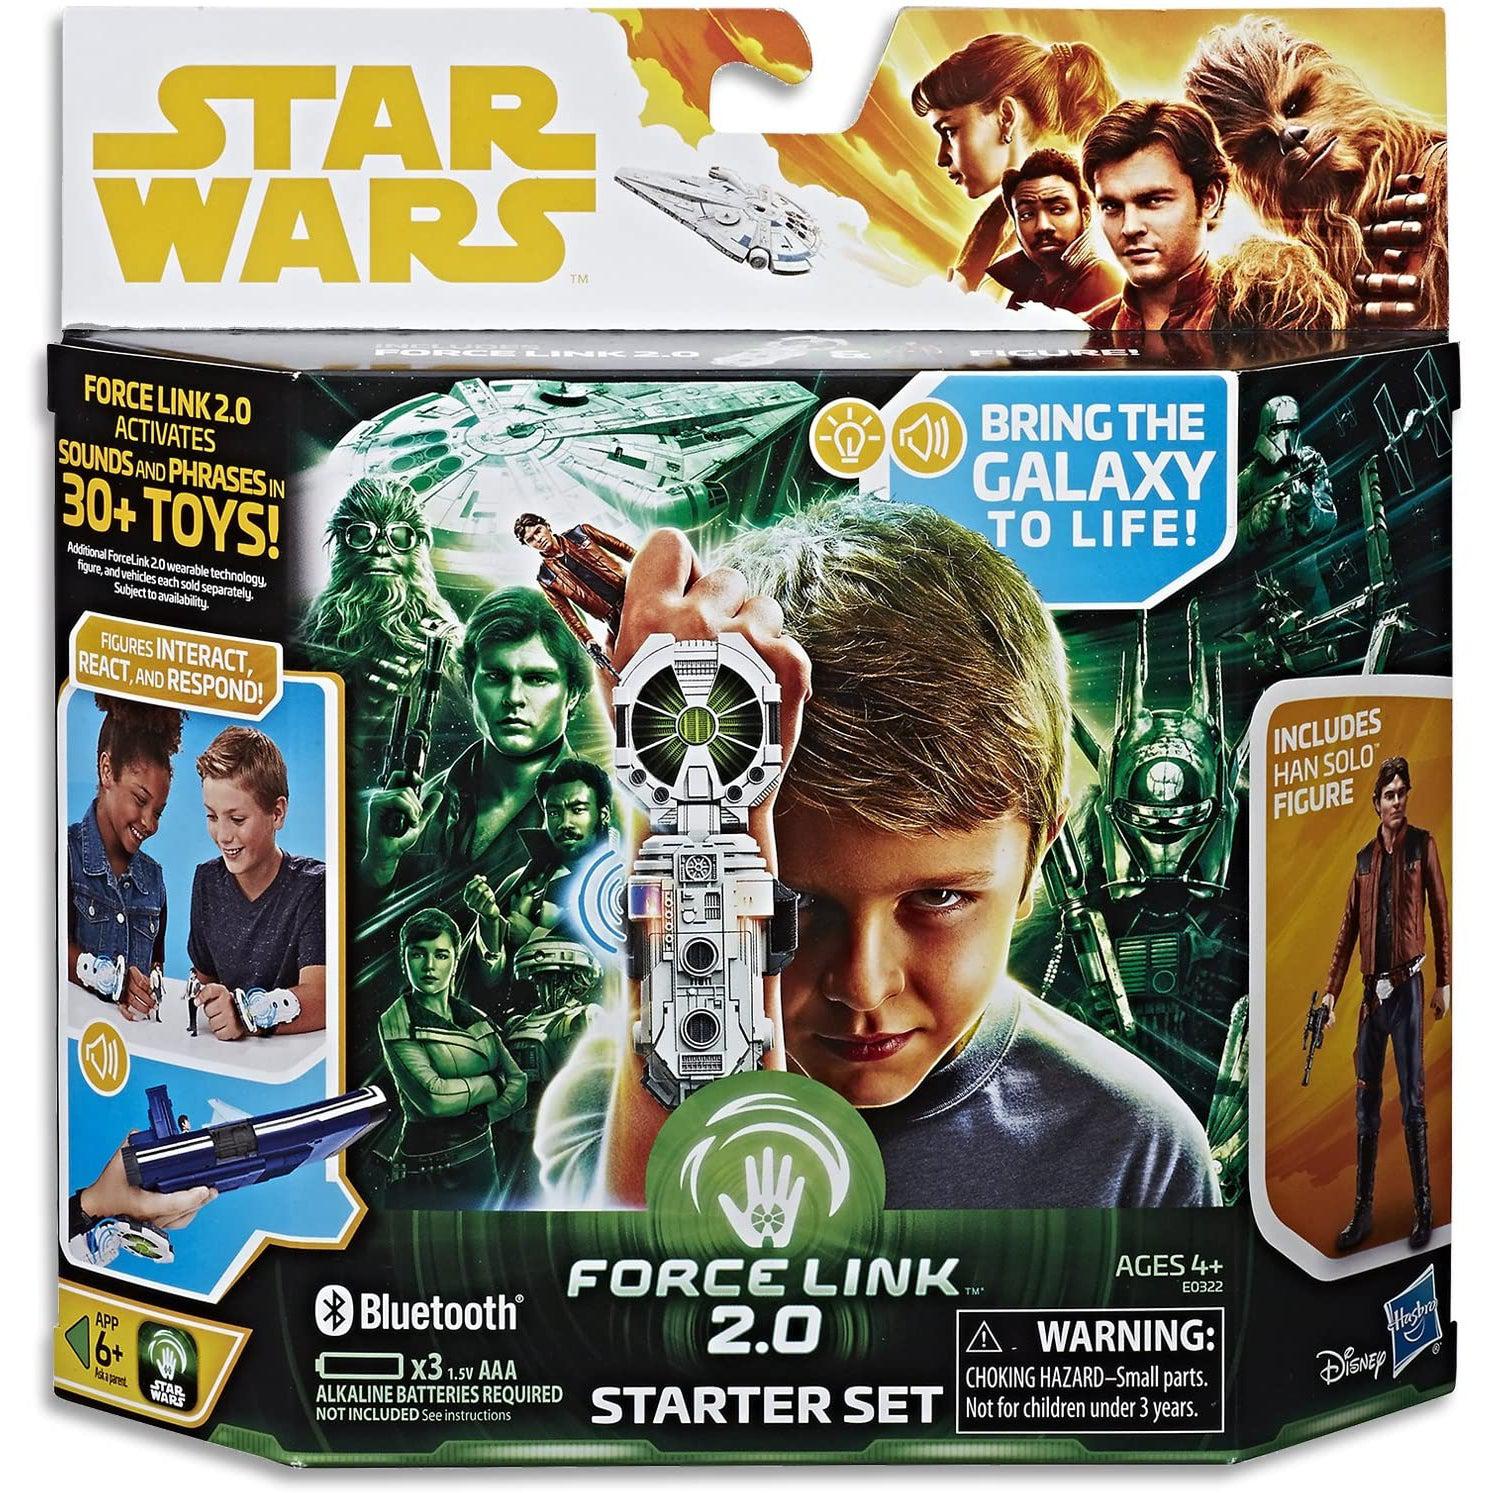 Hasbro-Star Wars: Force Link 2.0 Starter Kit – Solo: A Star Wars Story-E0322-Legacy Toys